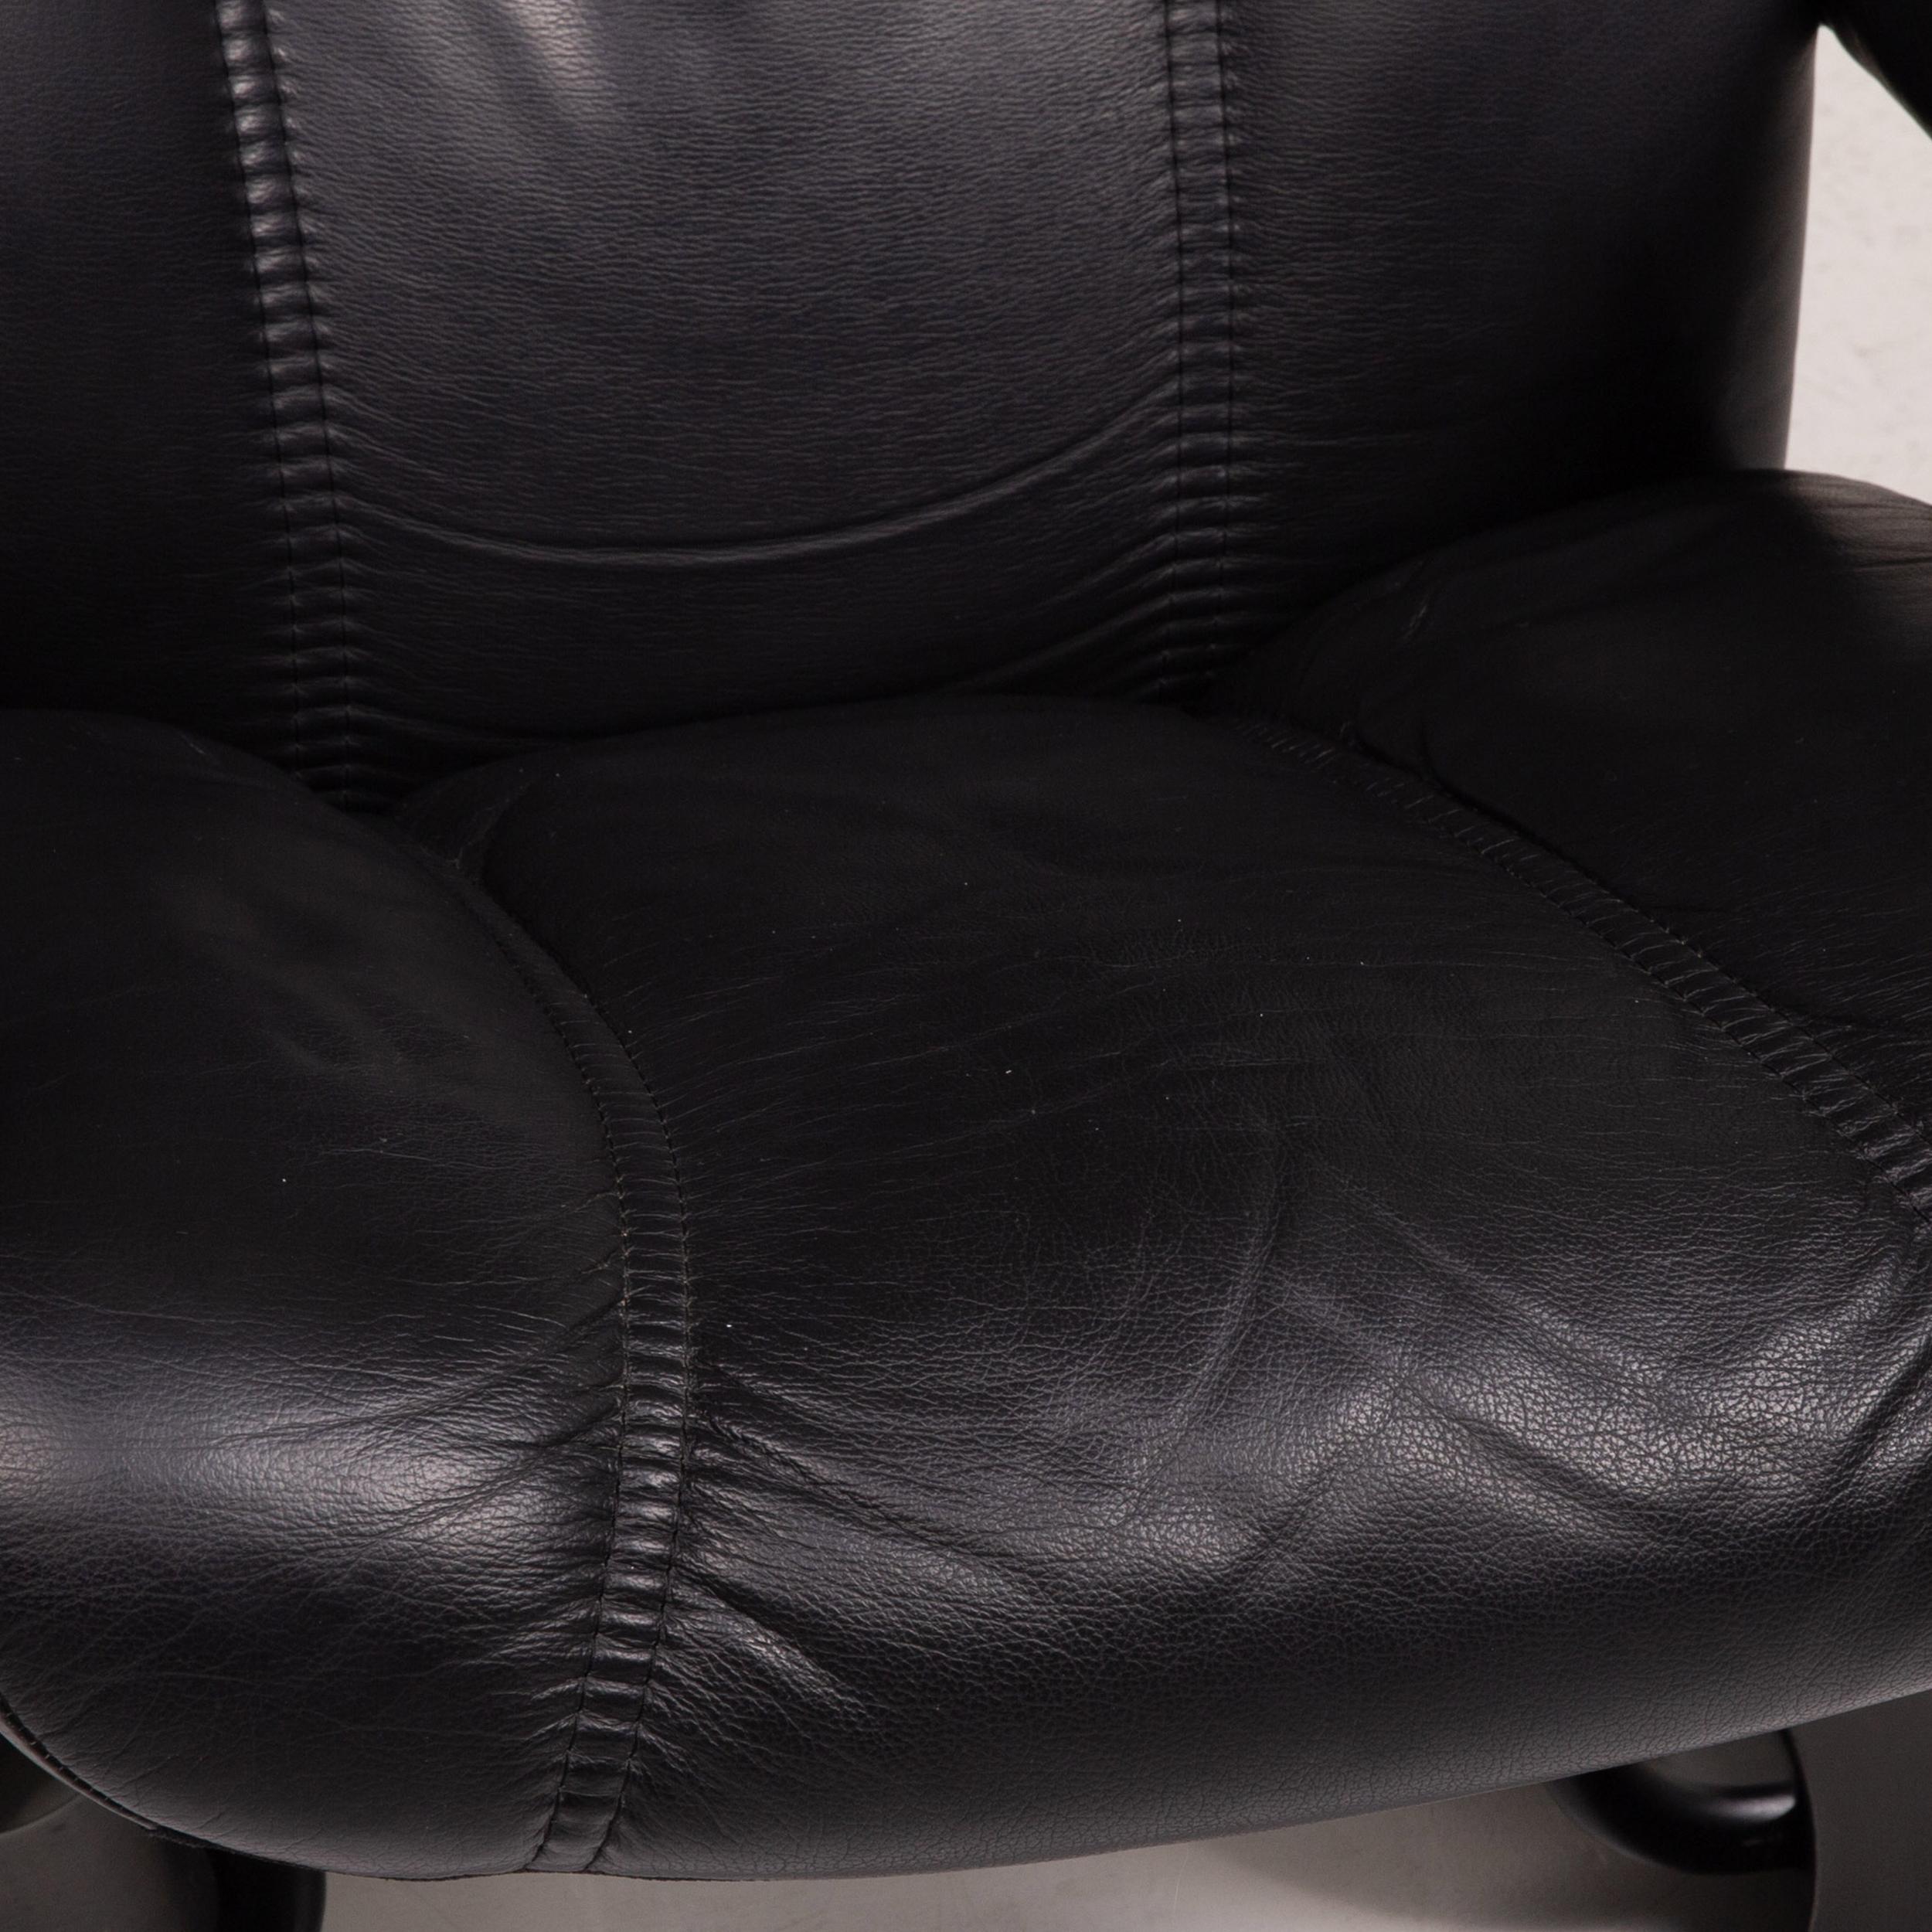 Norwegian Stressless Consul Leather Armchair Incl. Stool Black Function Relaxation For Sale